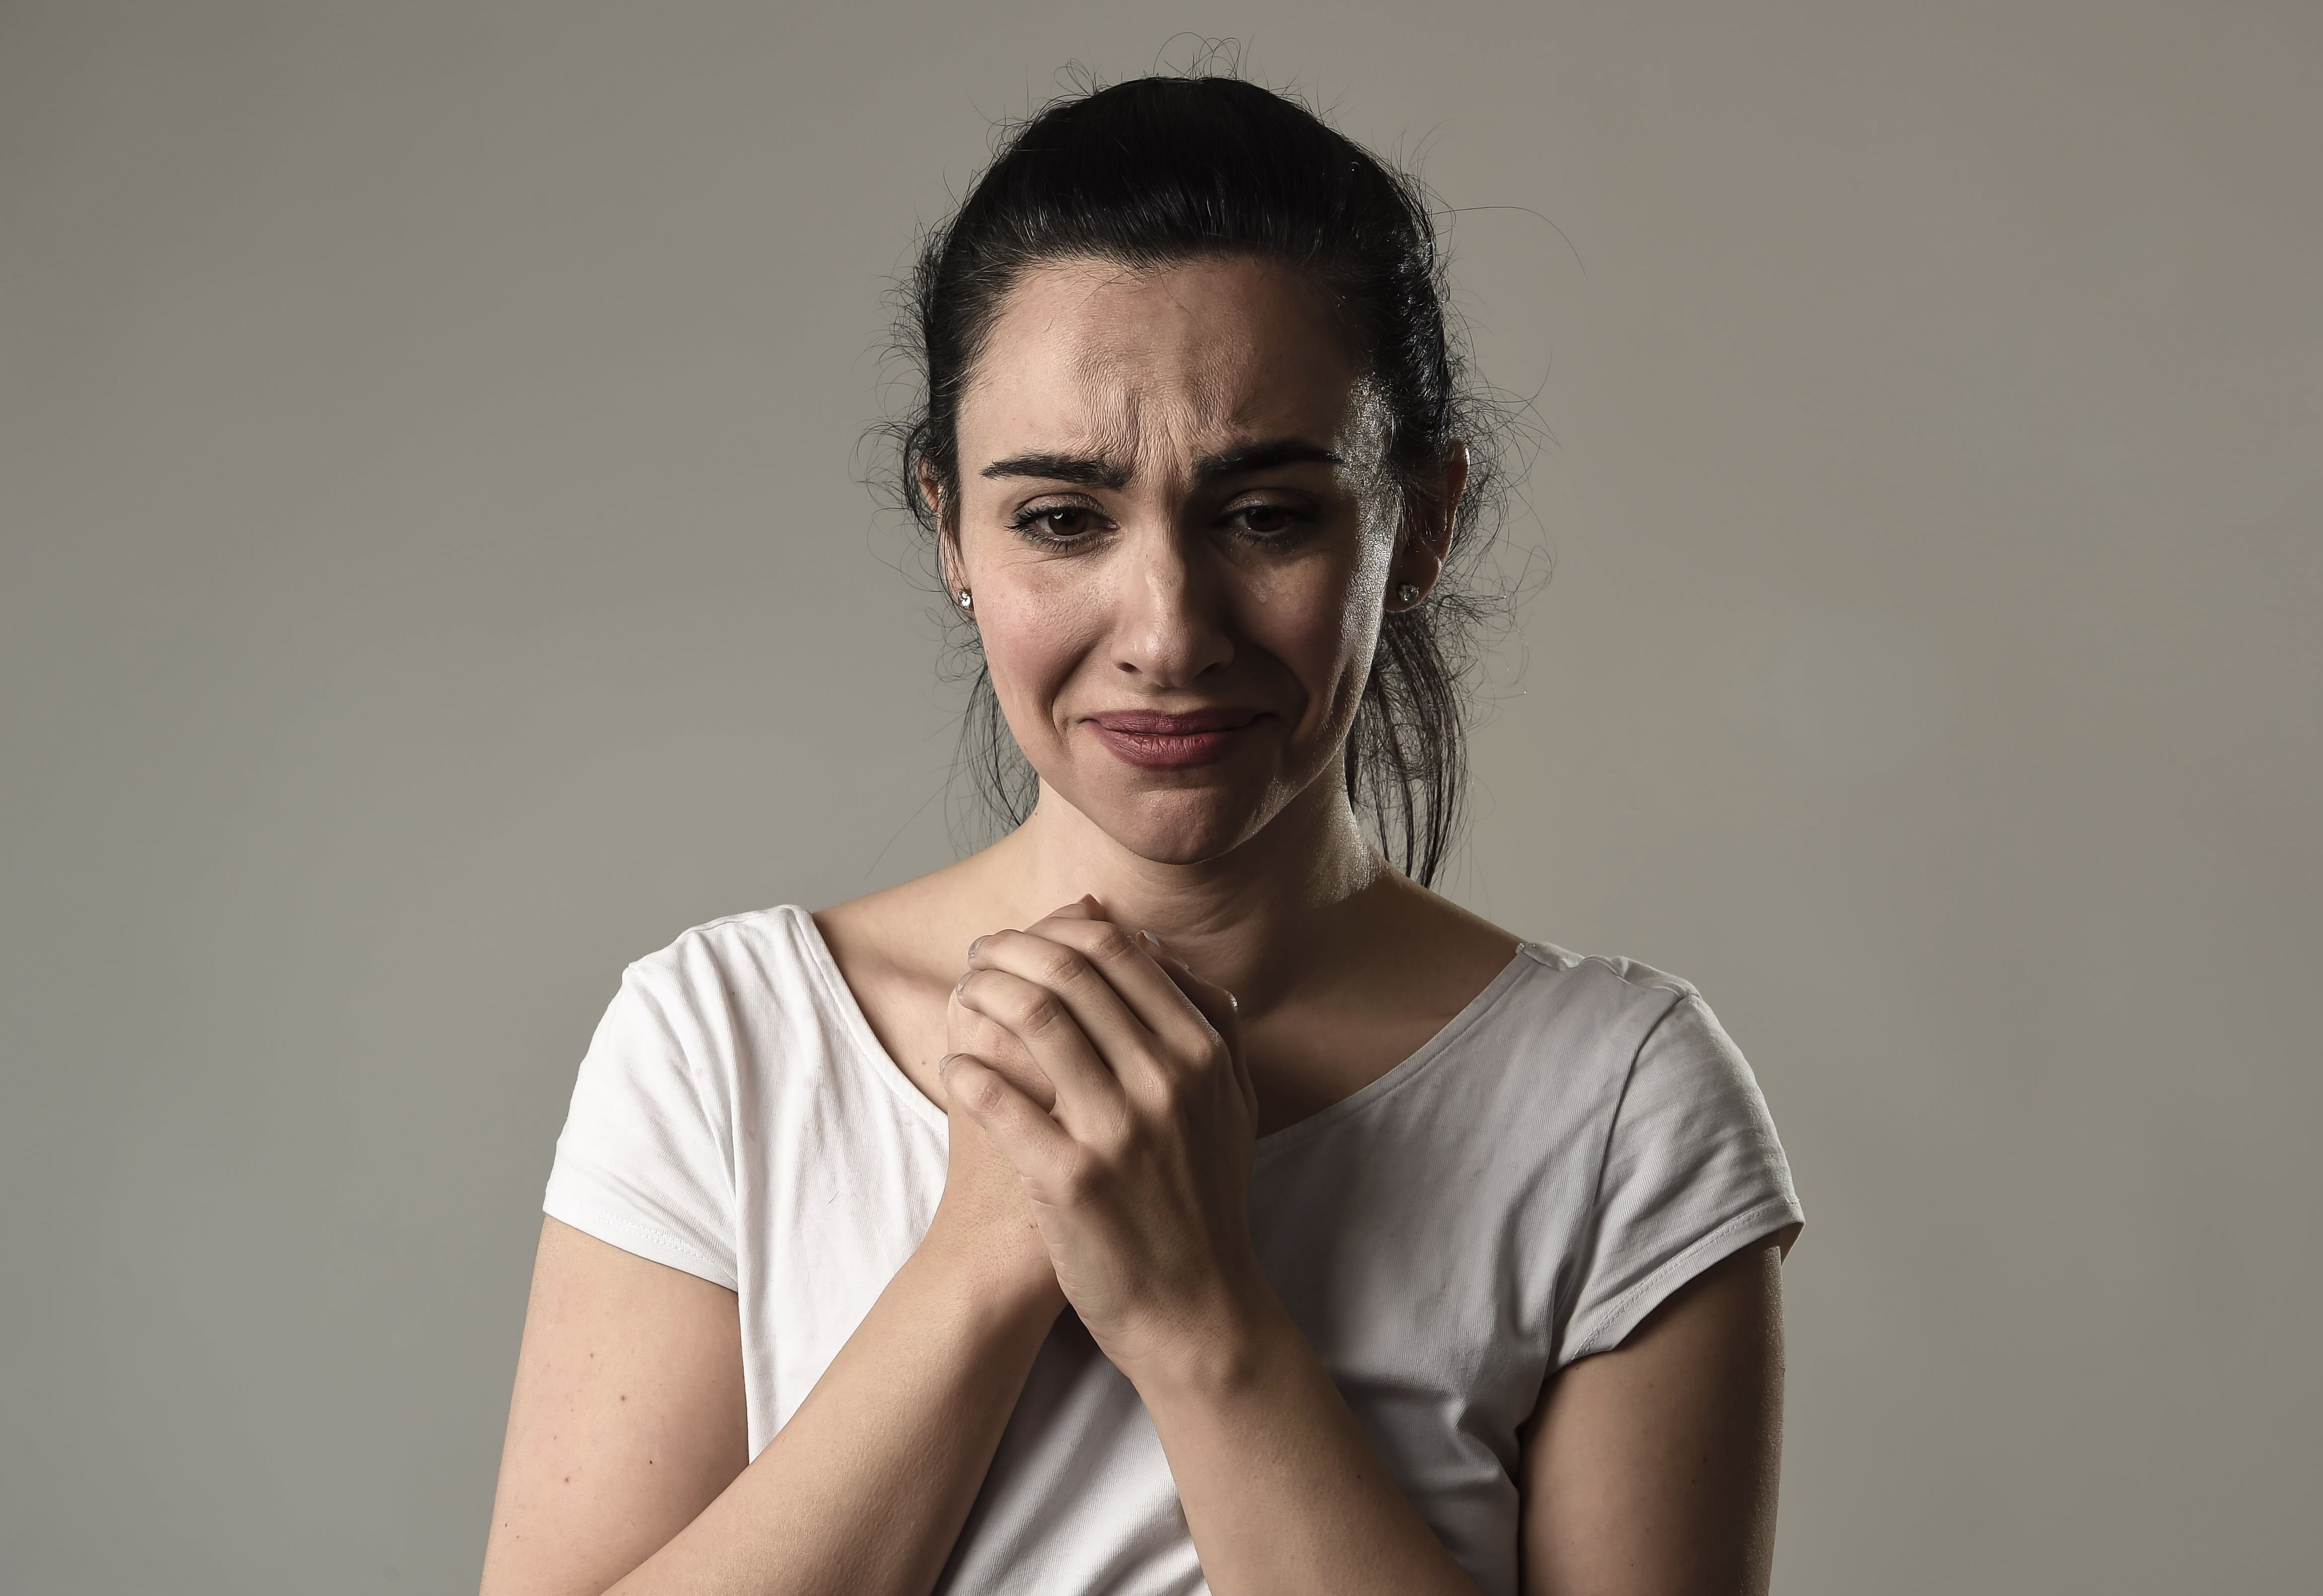 A woman holding both hands while in distraught. | Source: Shutterstock